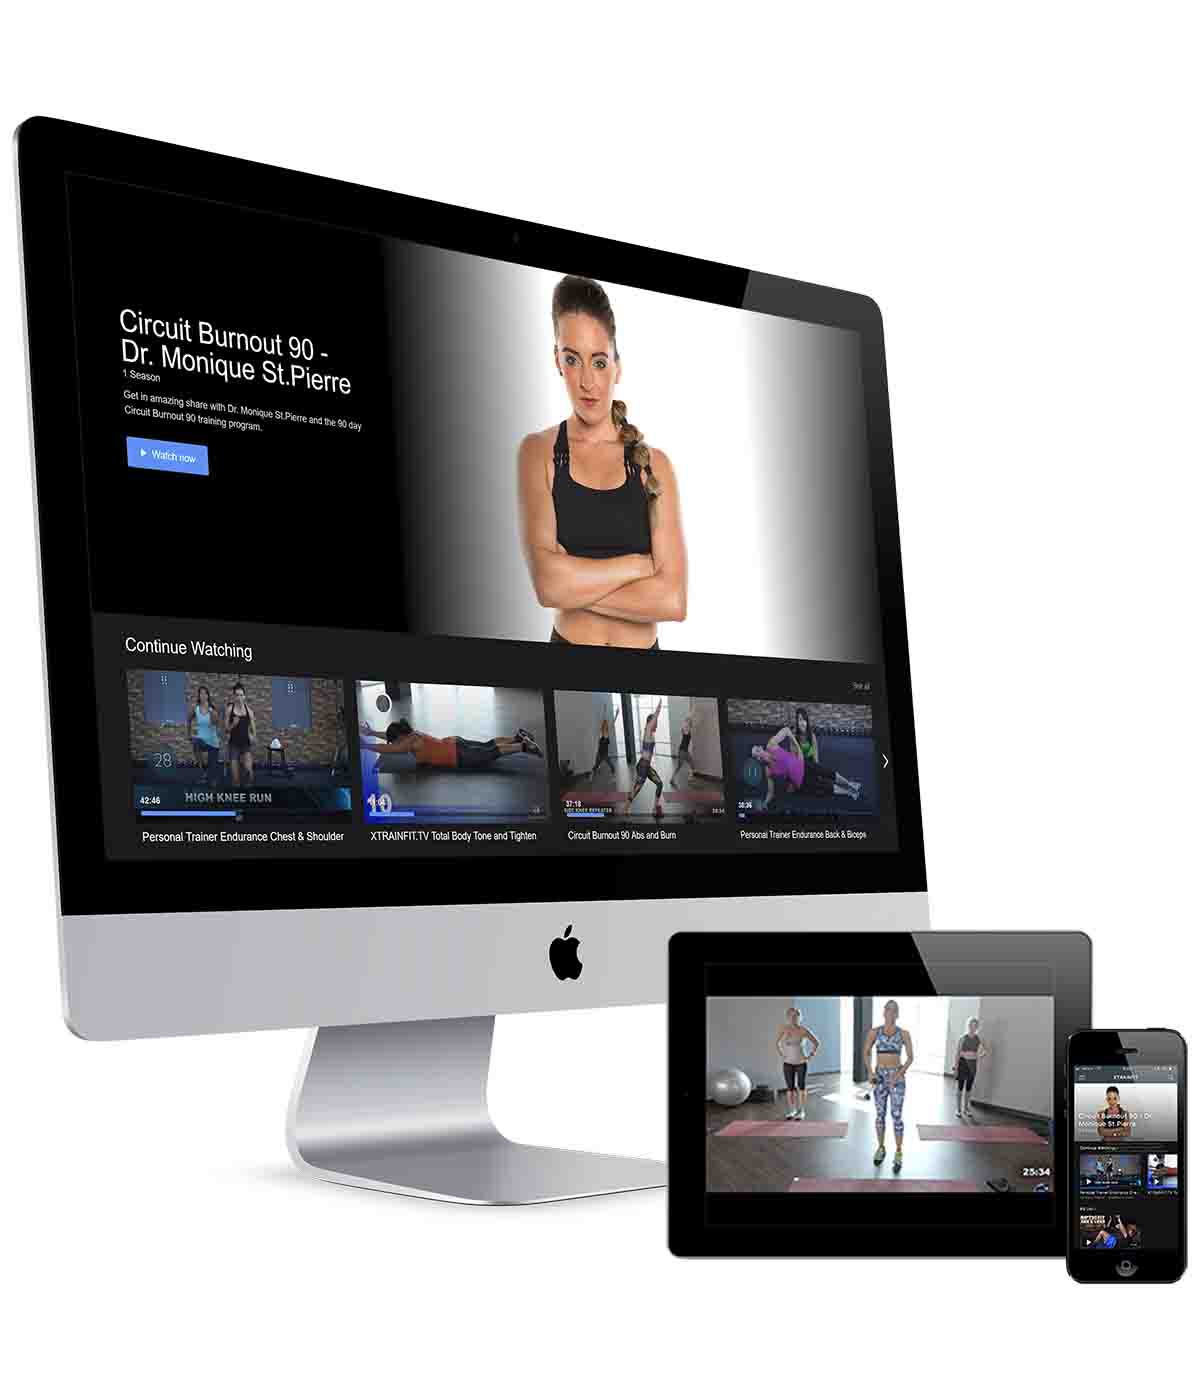 Stream all XTRAINFIT at home workouts on Vimeo on demand and workout in your on home or on the road with your favorite connected device